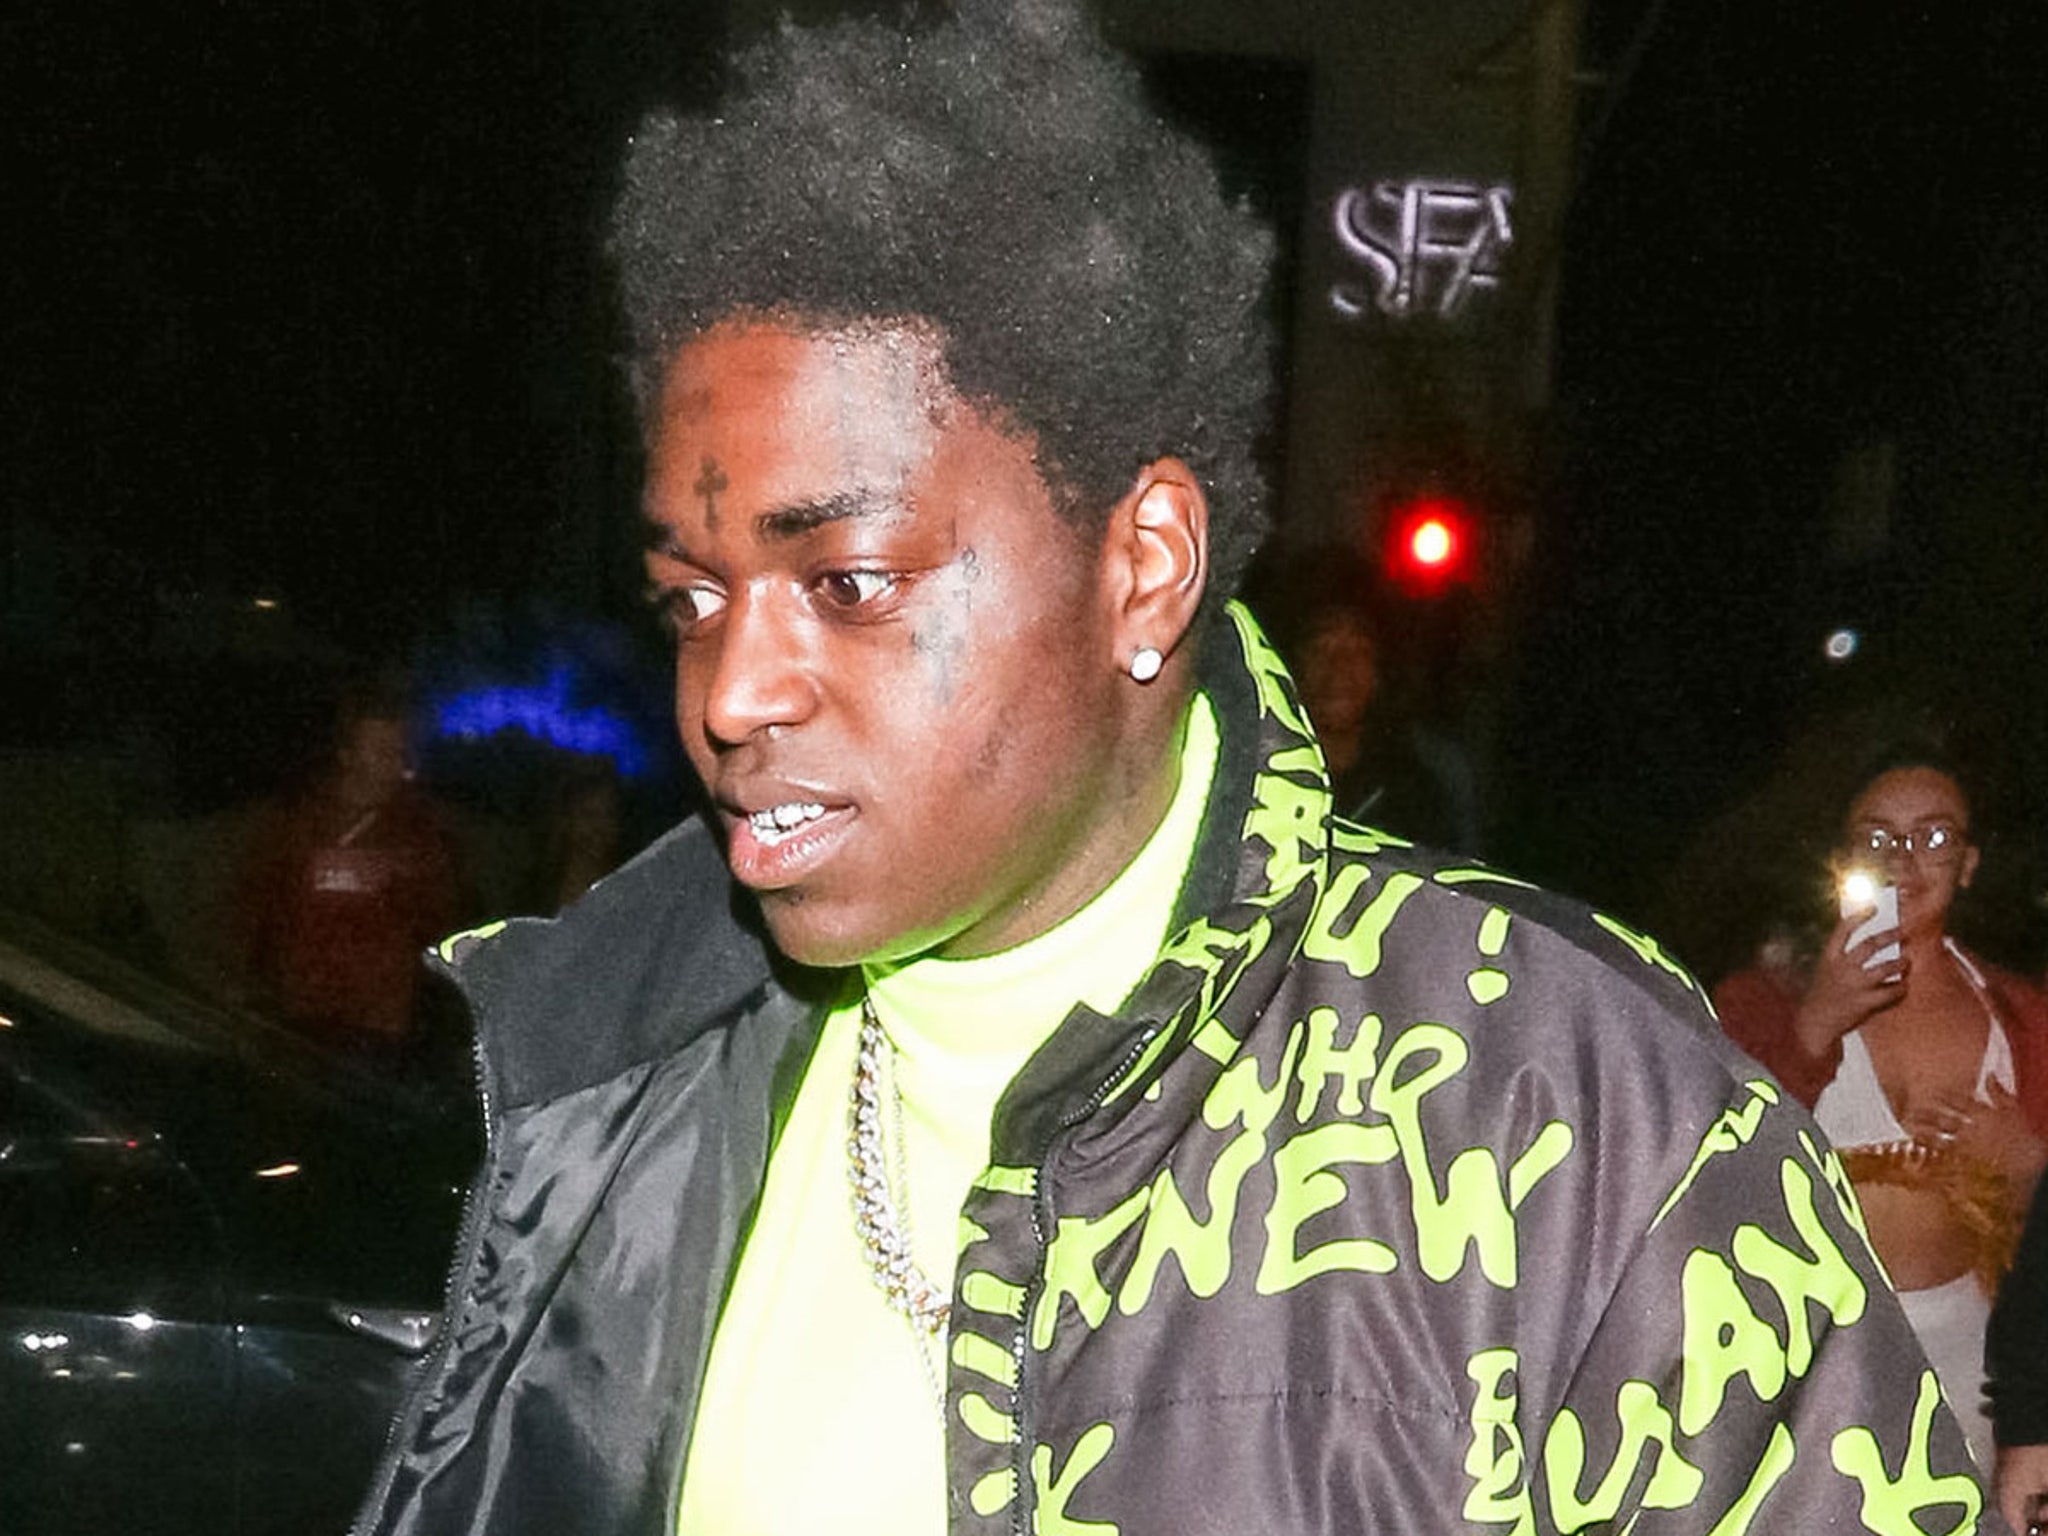 KodakBlack went right to strip club after bonding out of jail 💪🤣